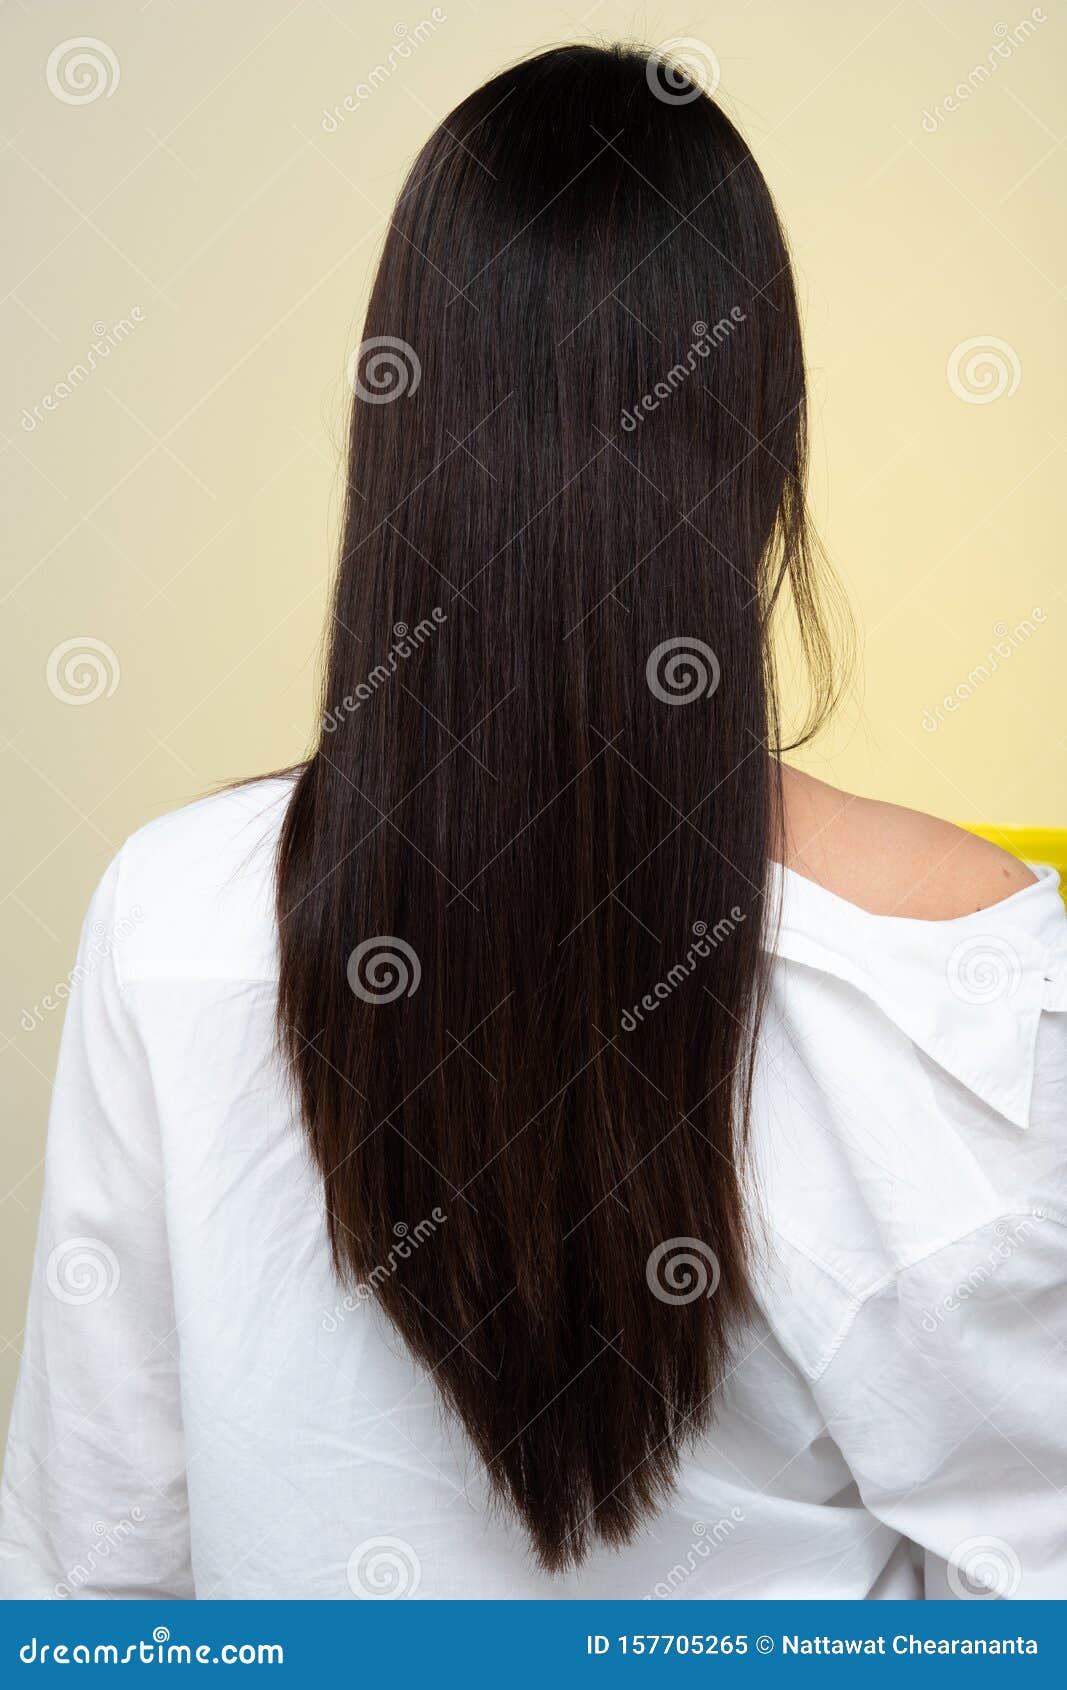 Back Side View of Women To Show Hair Style Stock Image - Image of lipstick,  compare: 157705265